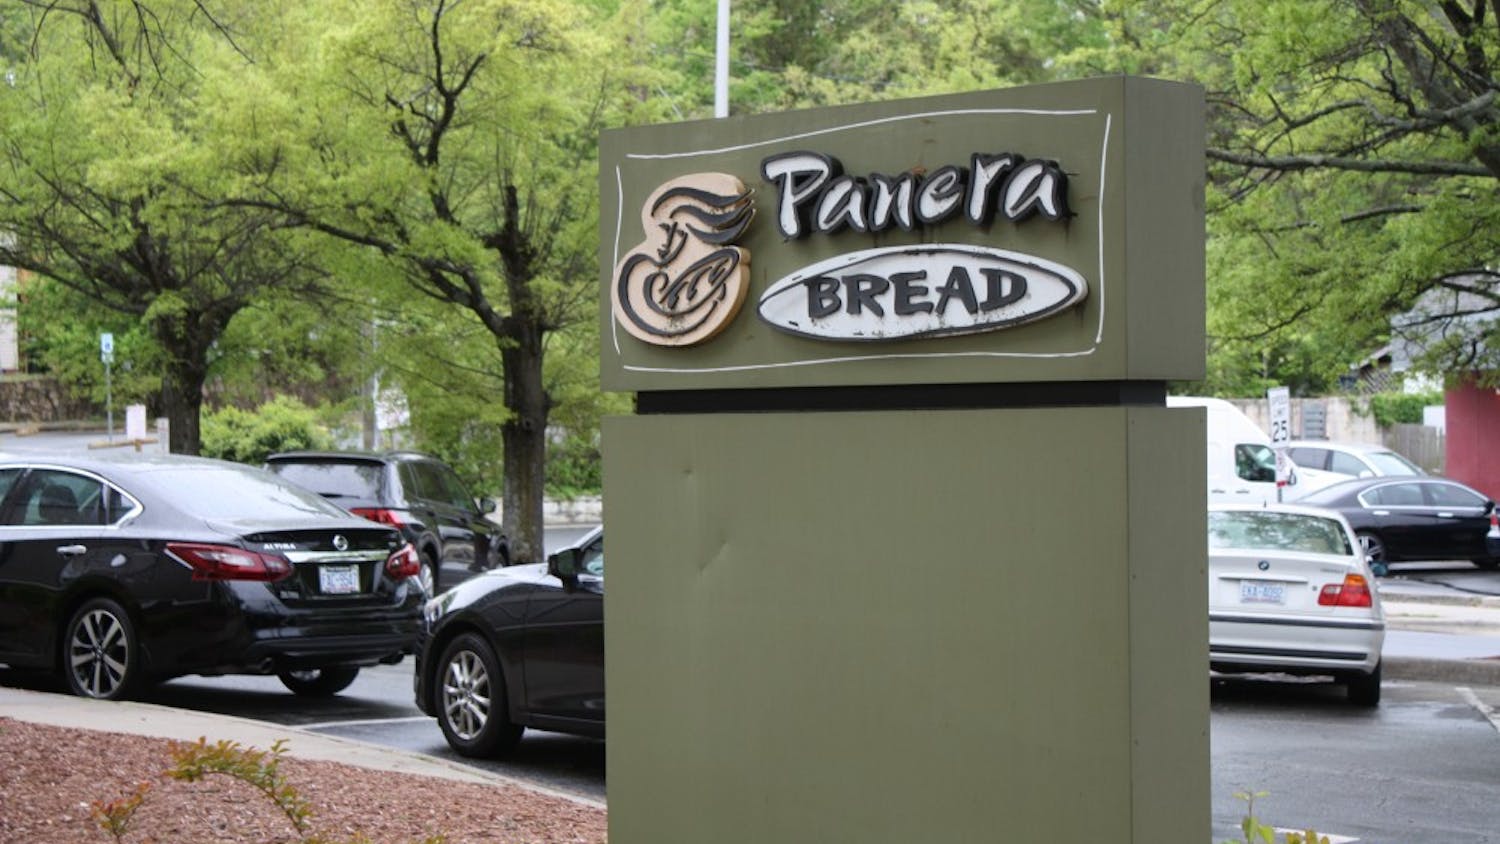 The Food Recovery Network at UNC-Chapel Hill partners with Panera Bread as a recovery location to collect surplus food for partner agencies that work to fight food insecurity.&nbsp;